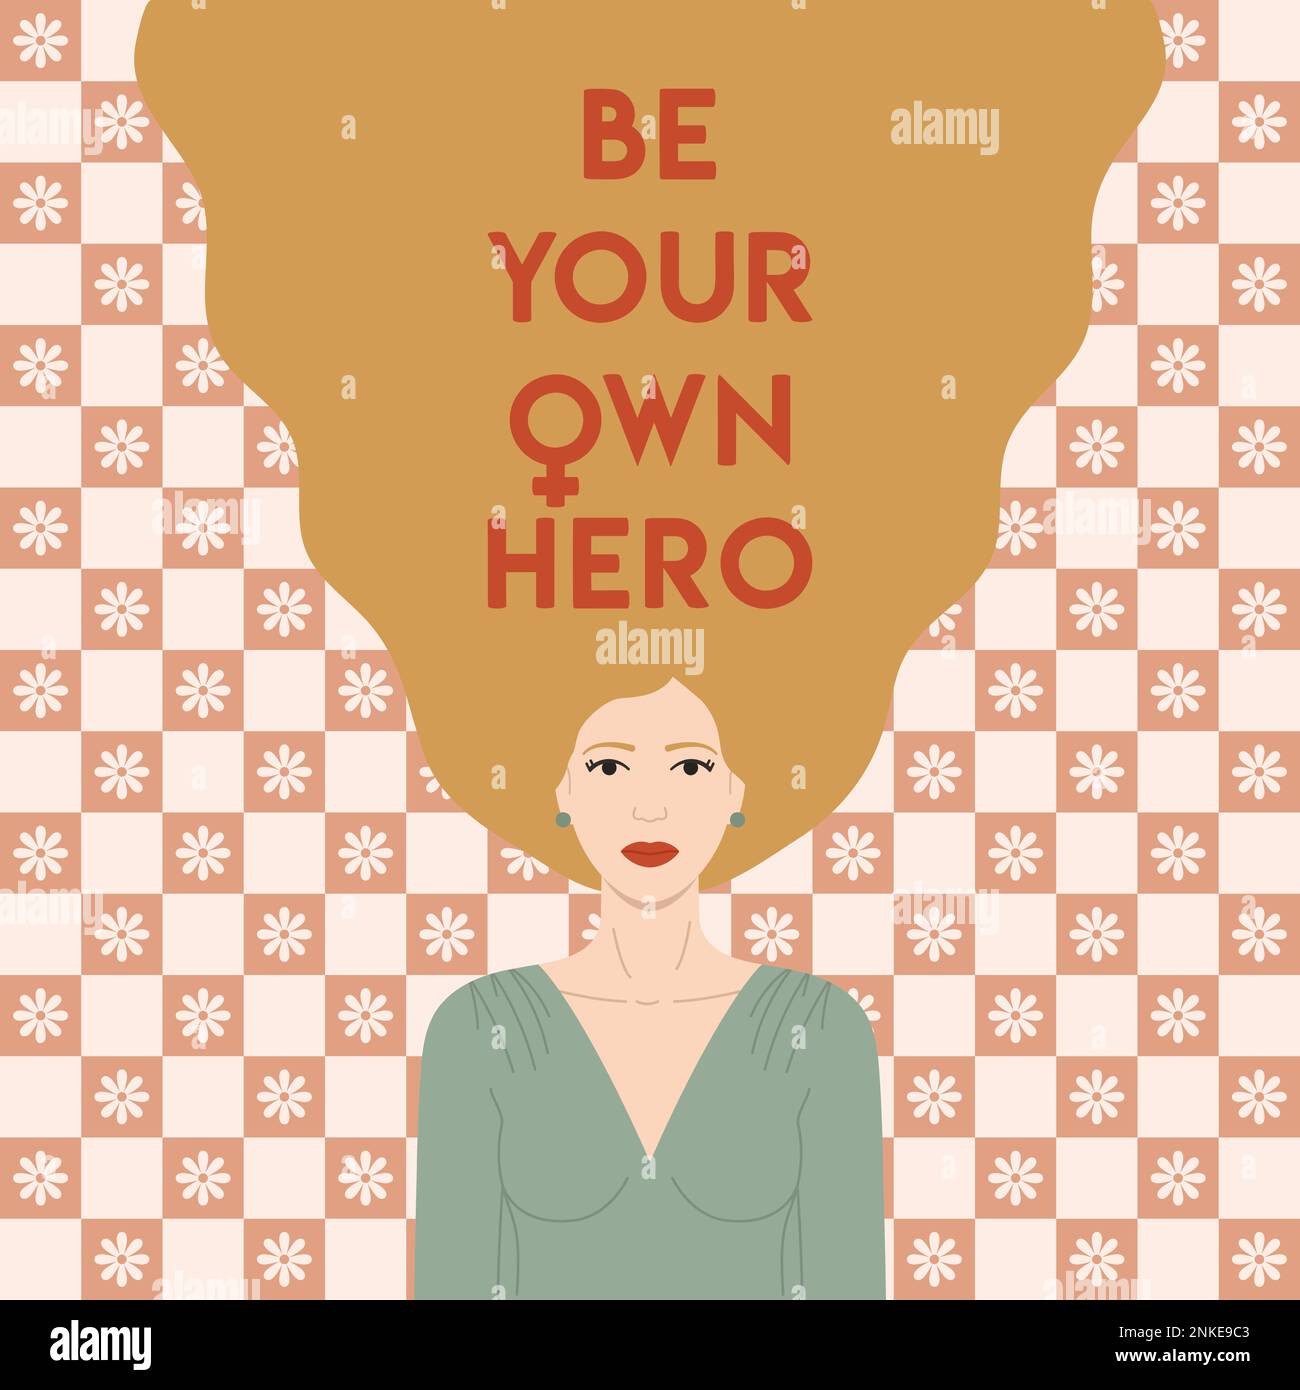 Be your own hero lettering on gold hair caucasian woman in retro groovy style. Woman rights and empowerment, equality, feminism, sisterhood. Internati Stock Vector